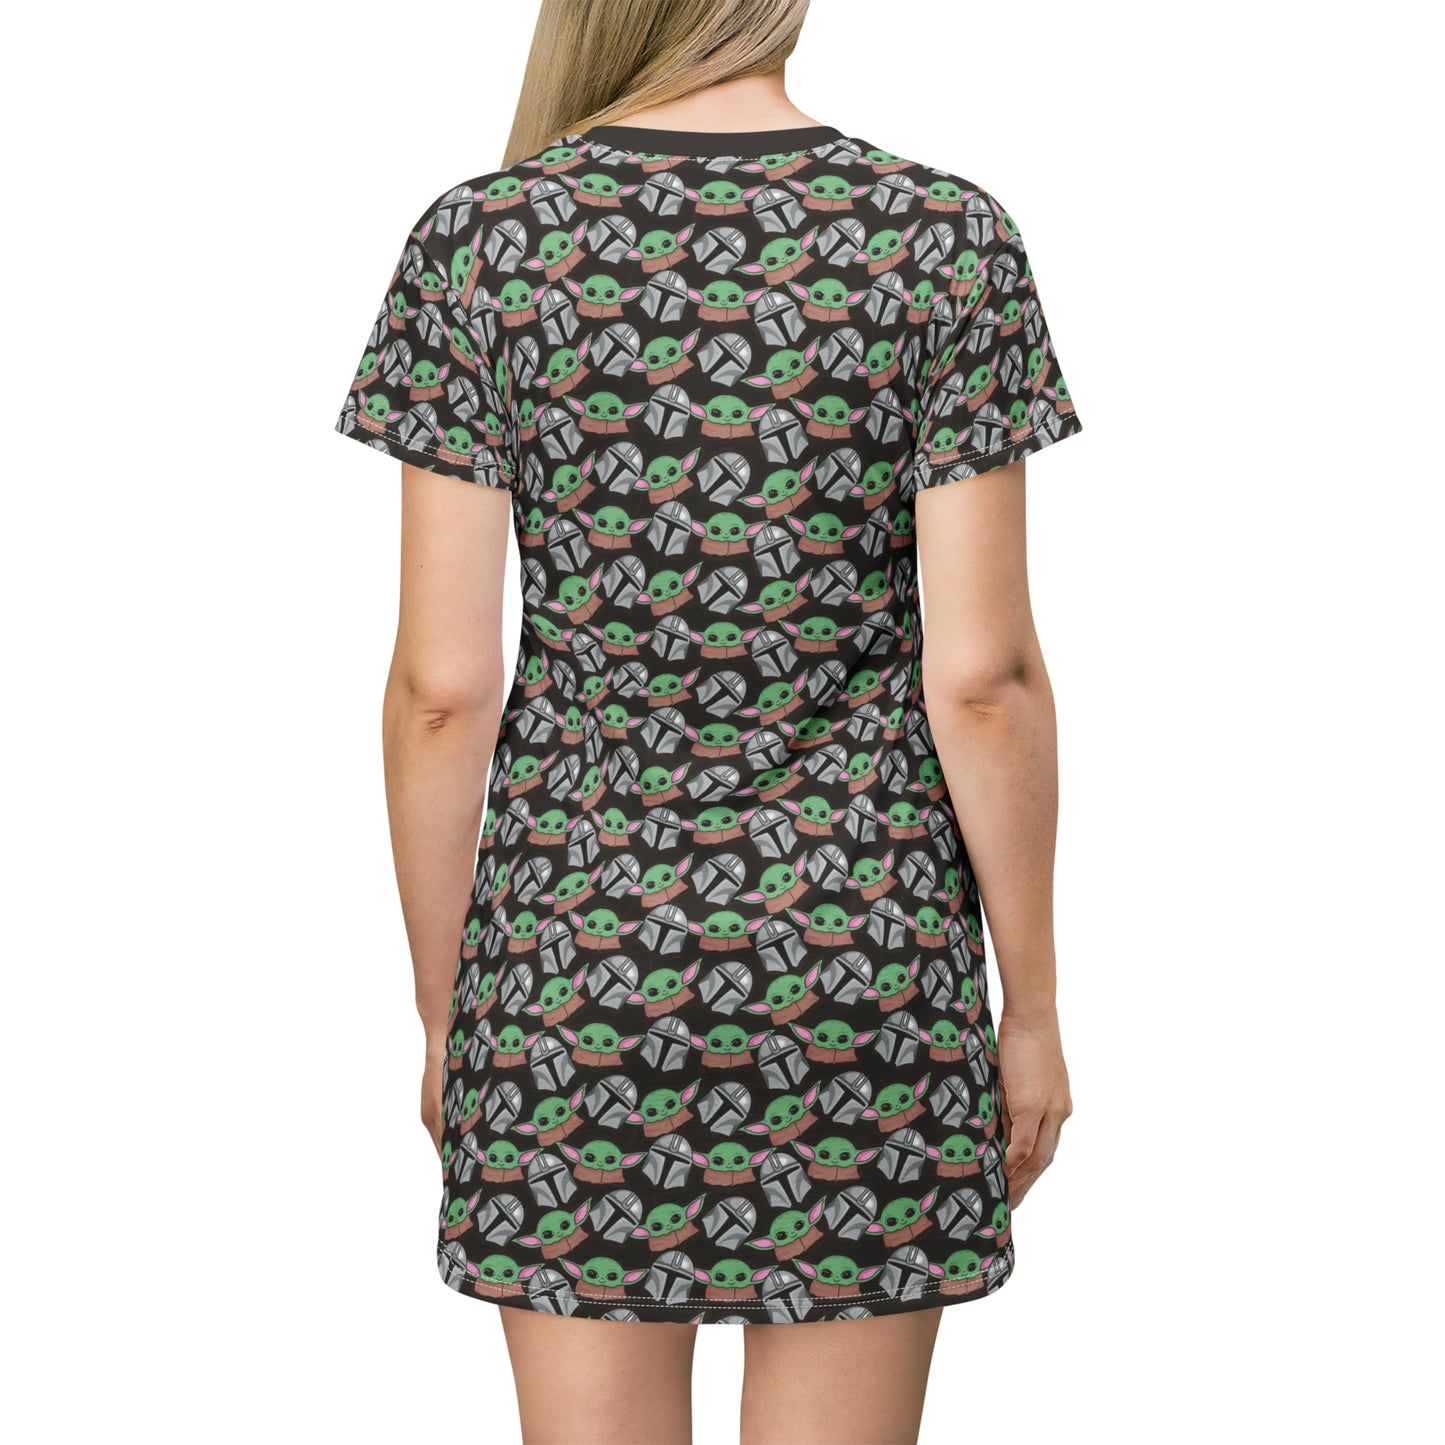 This Is The Way T-Shirt Dress